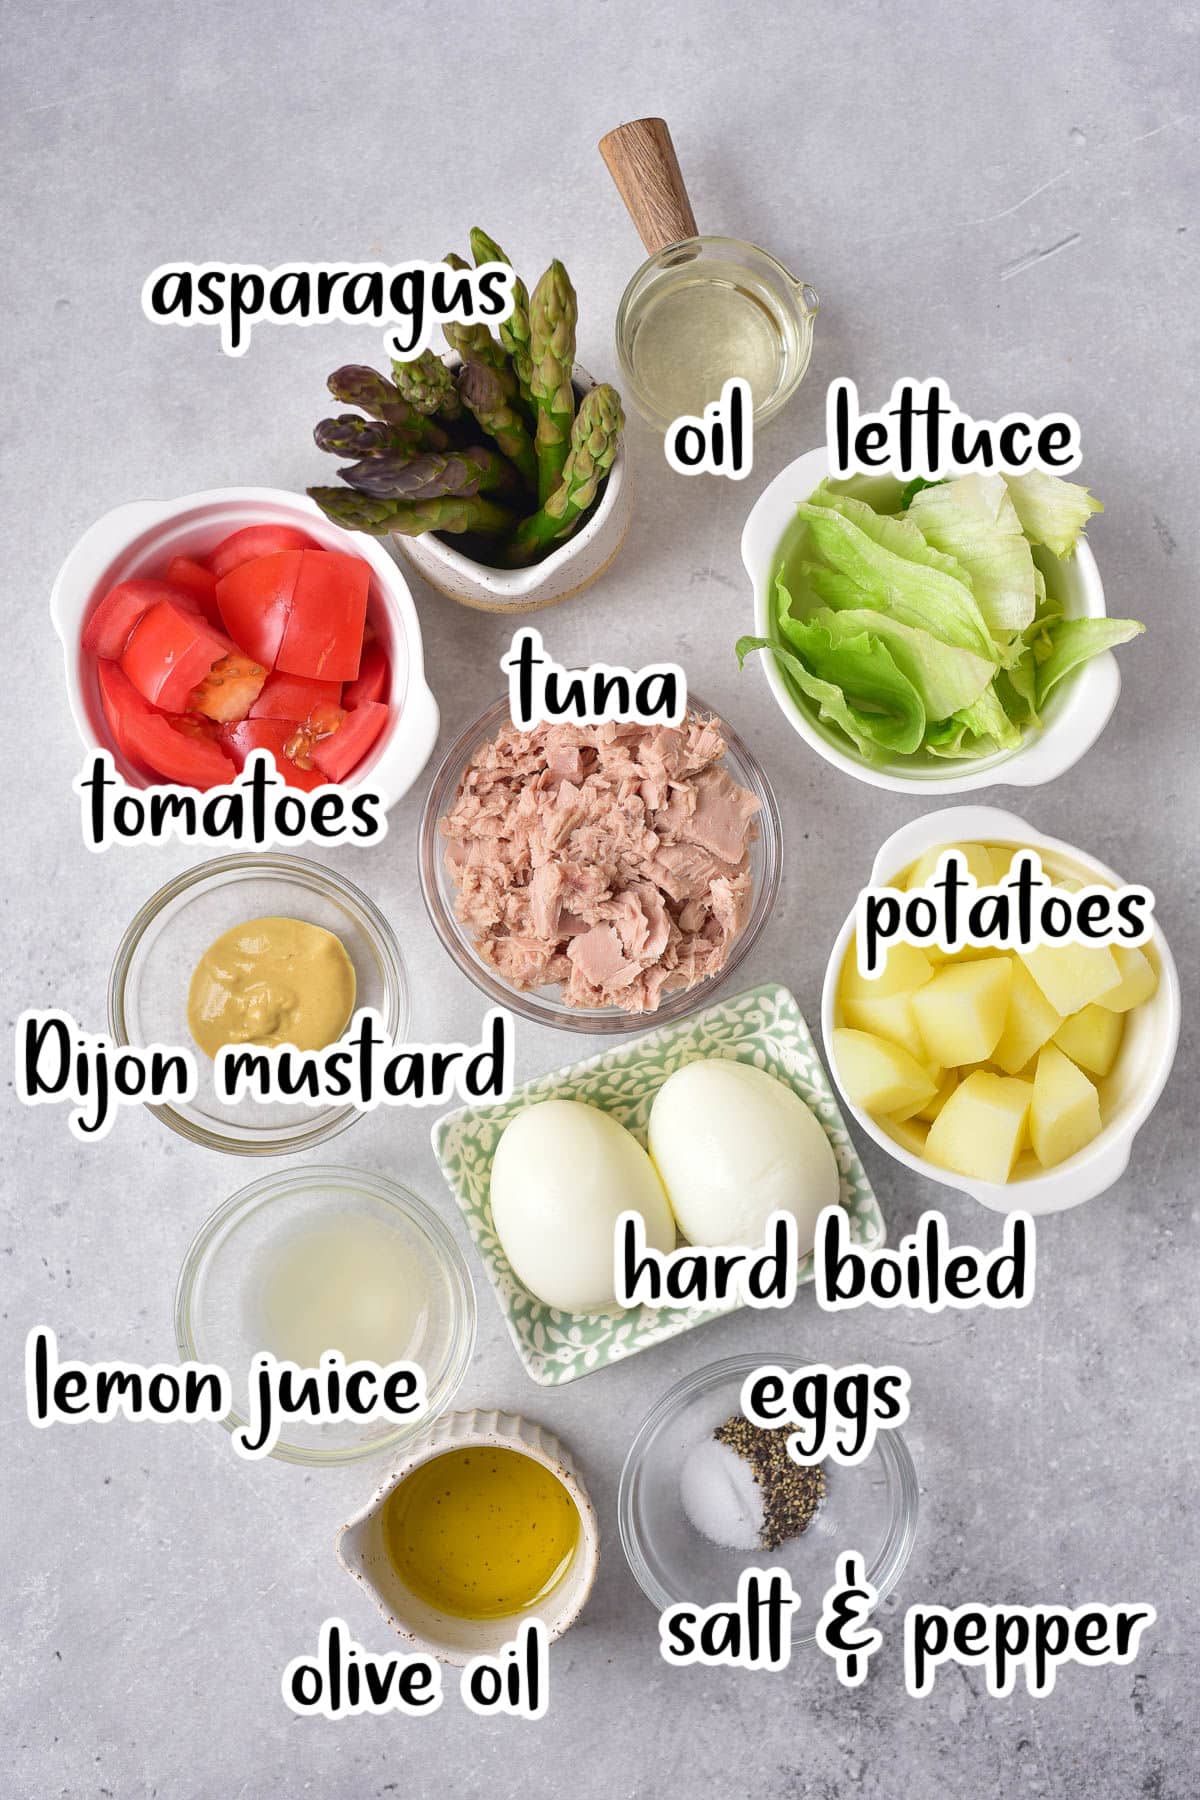 Labeled ingredients for a tuna nicoise salad.